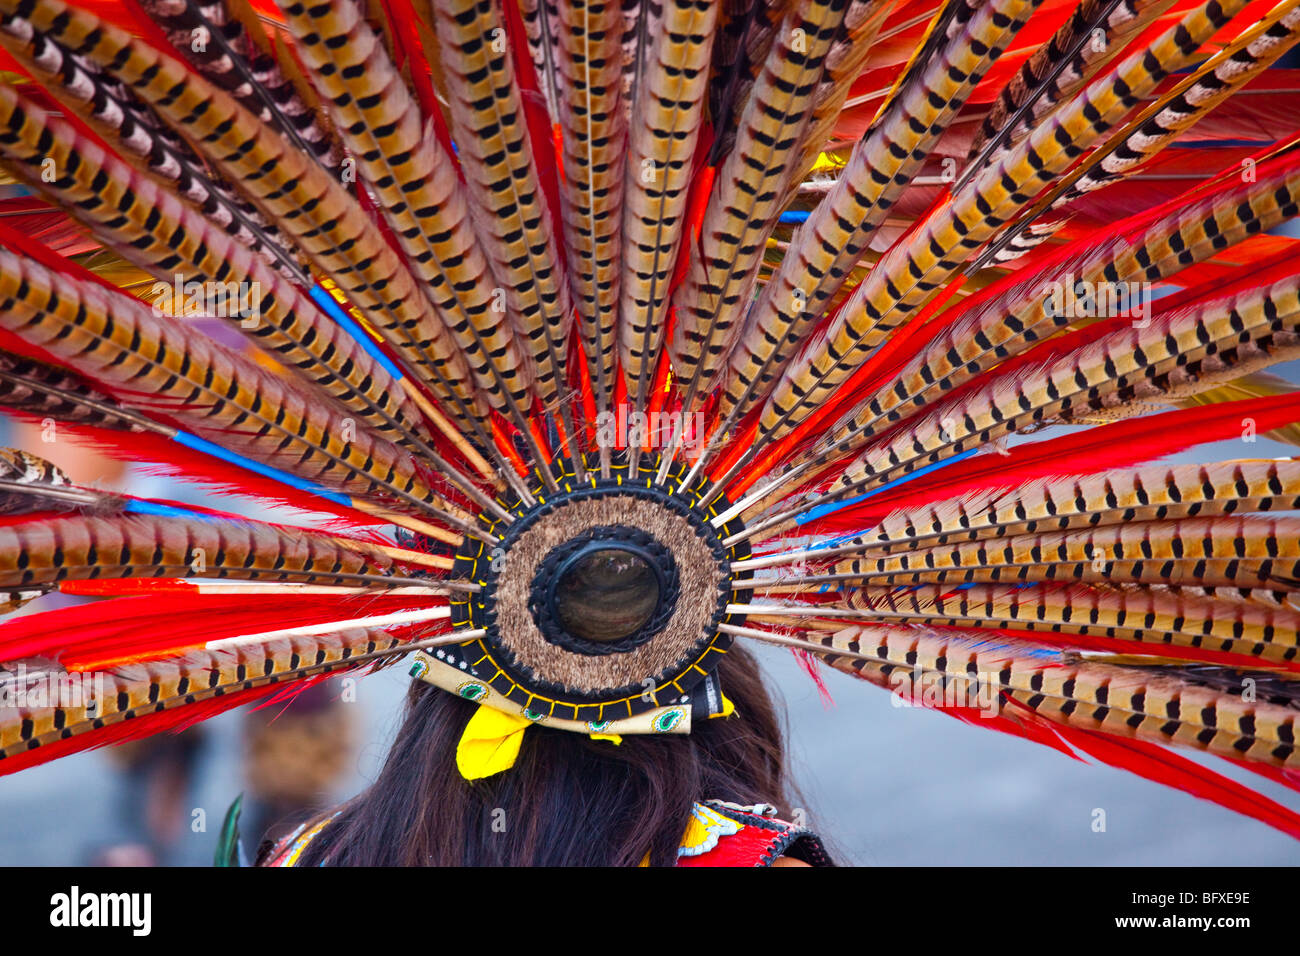 Feathers from the headdress of an Aztec dancer in Plaza de la Constitucion in Mexico City Stock Photo